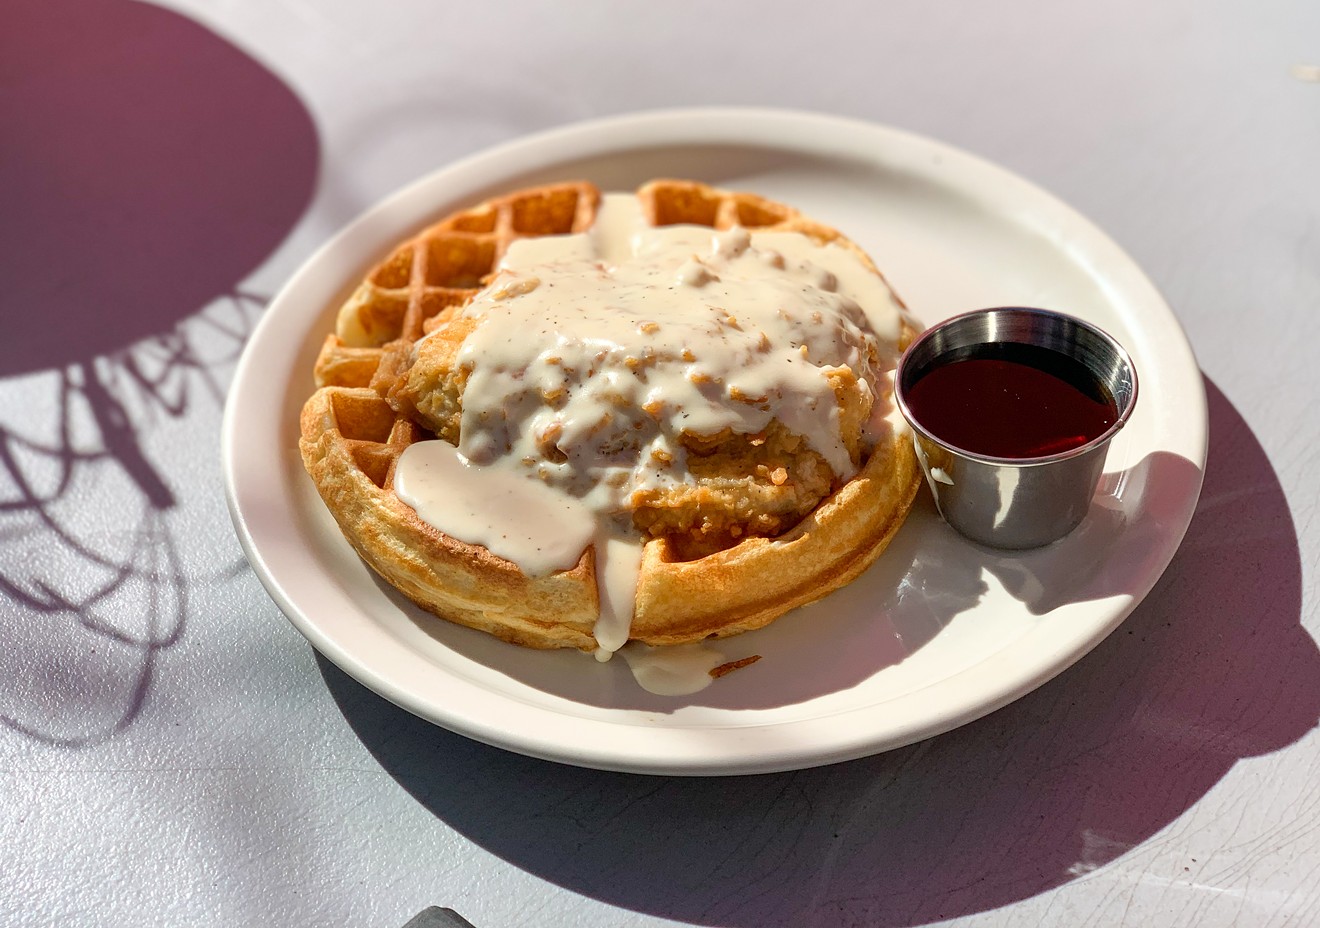 Above-average chicken on a waffle